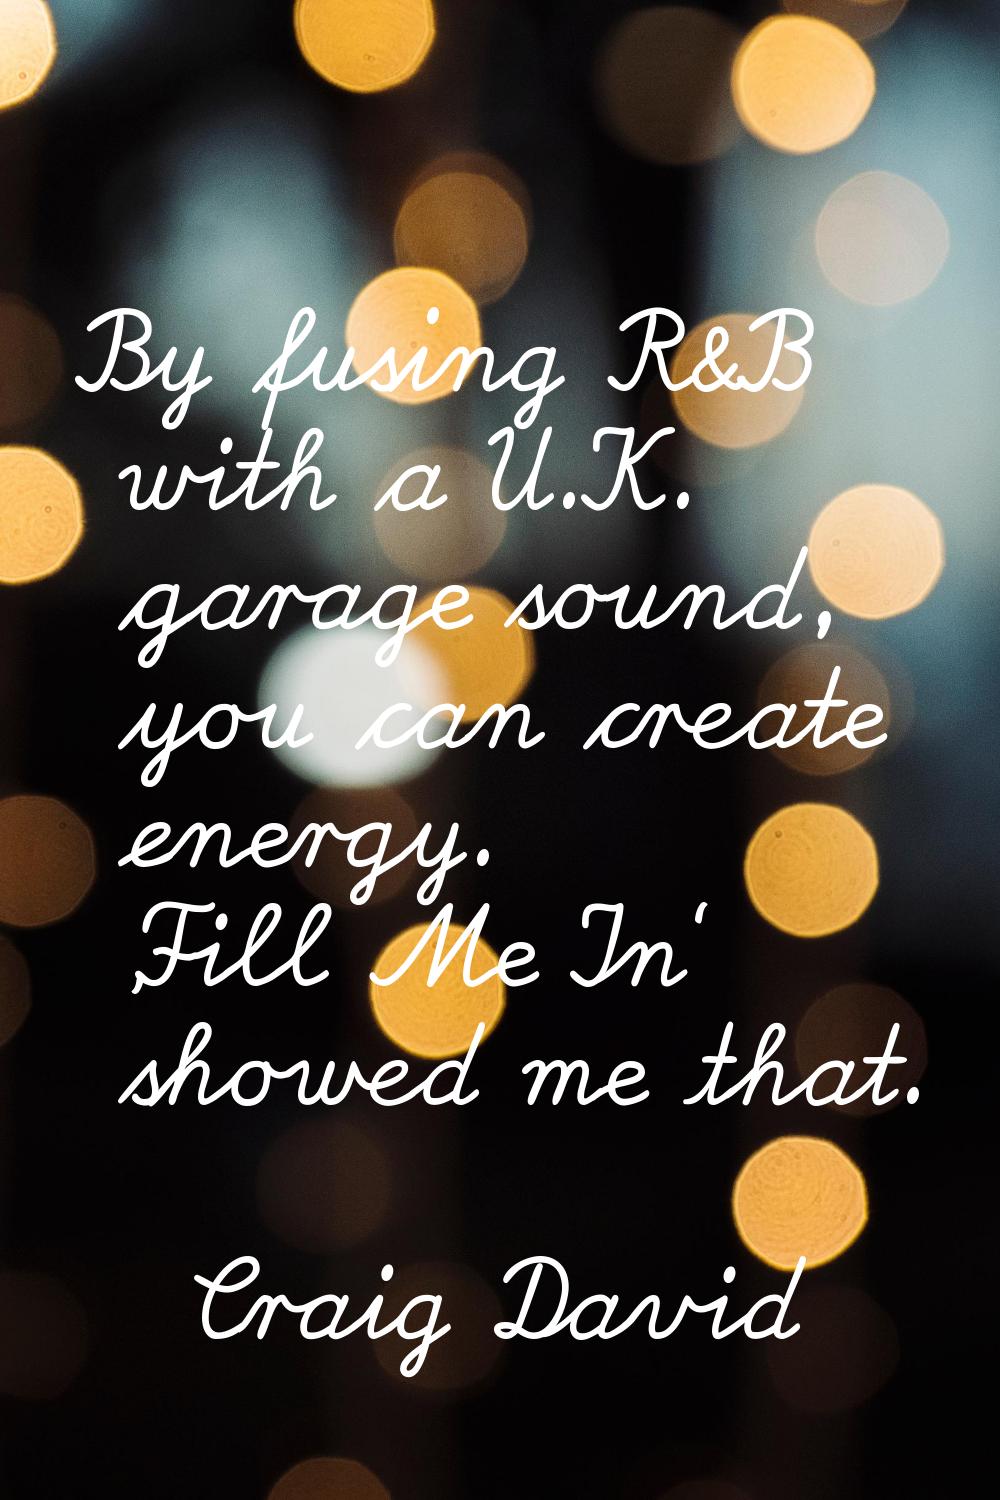 By fusing R&B with a U.K. garage sound, you can create energy. 'Fill Me In' showed me that.